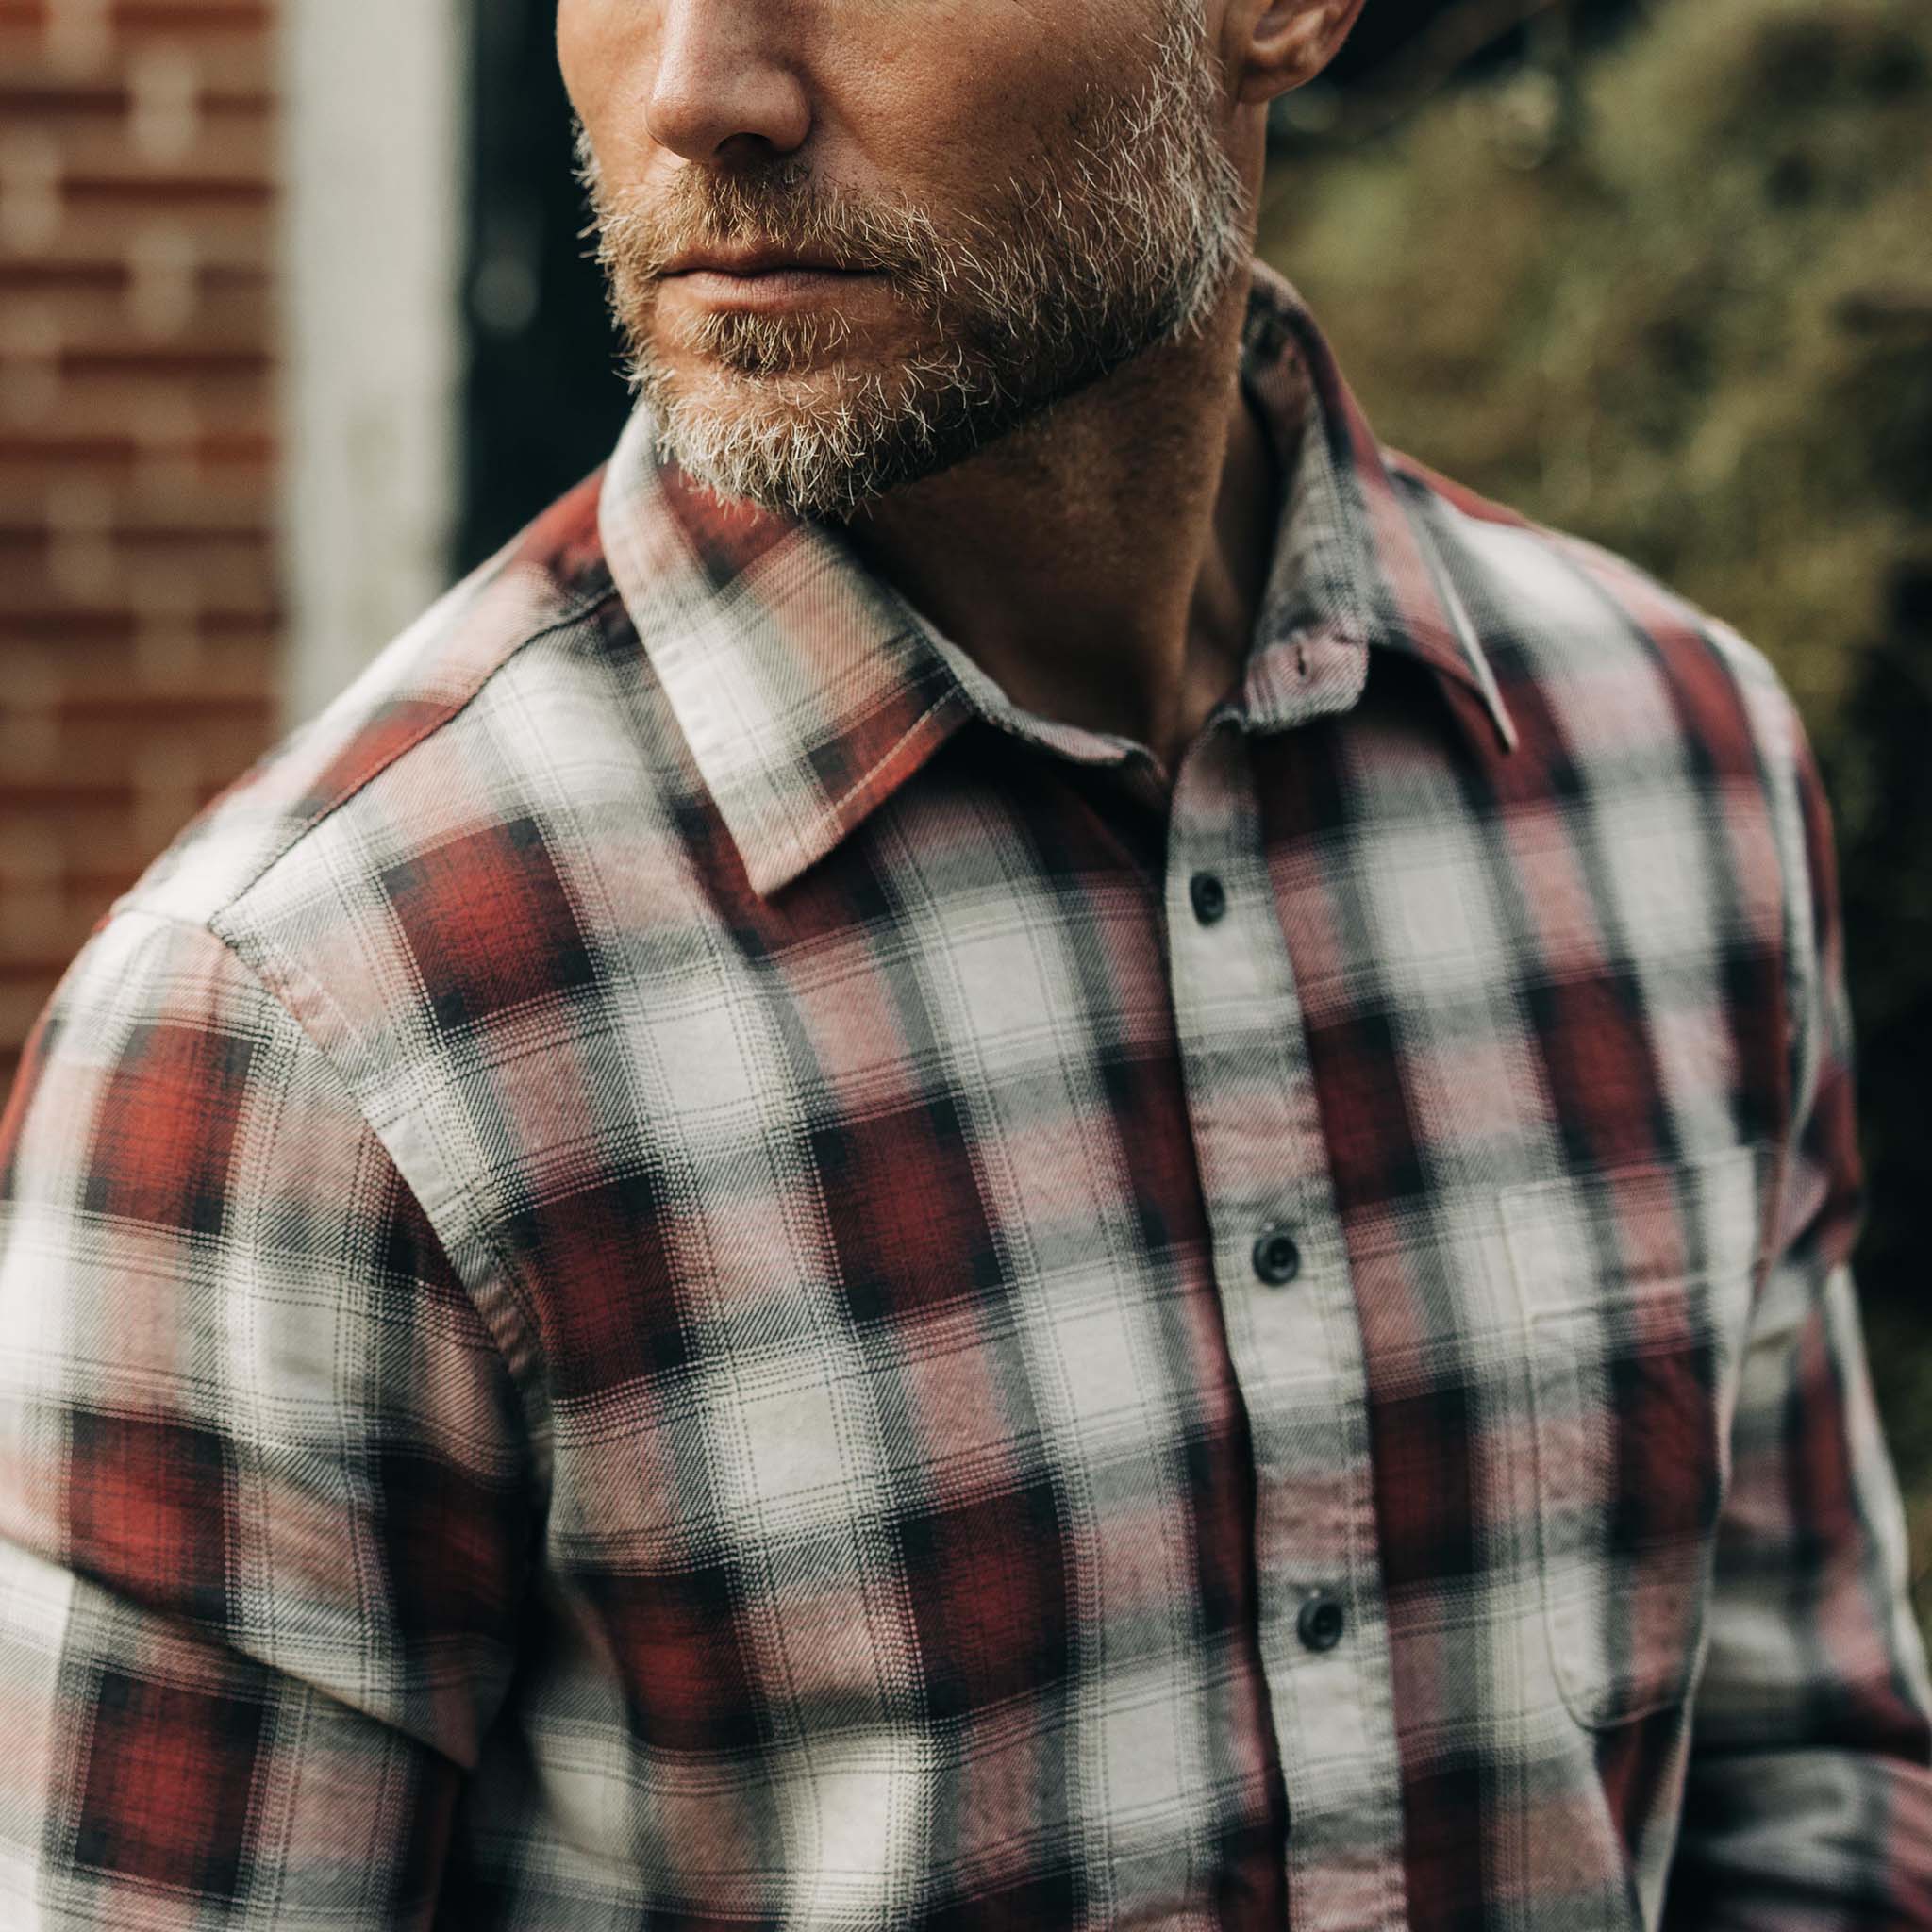 The Ledge Flannel Shirt in Conifer Plaid